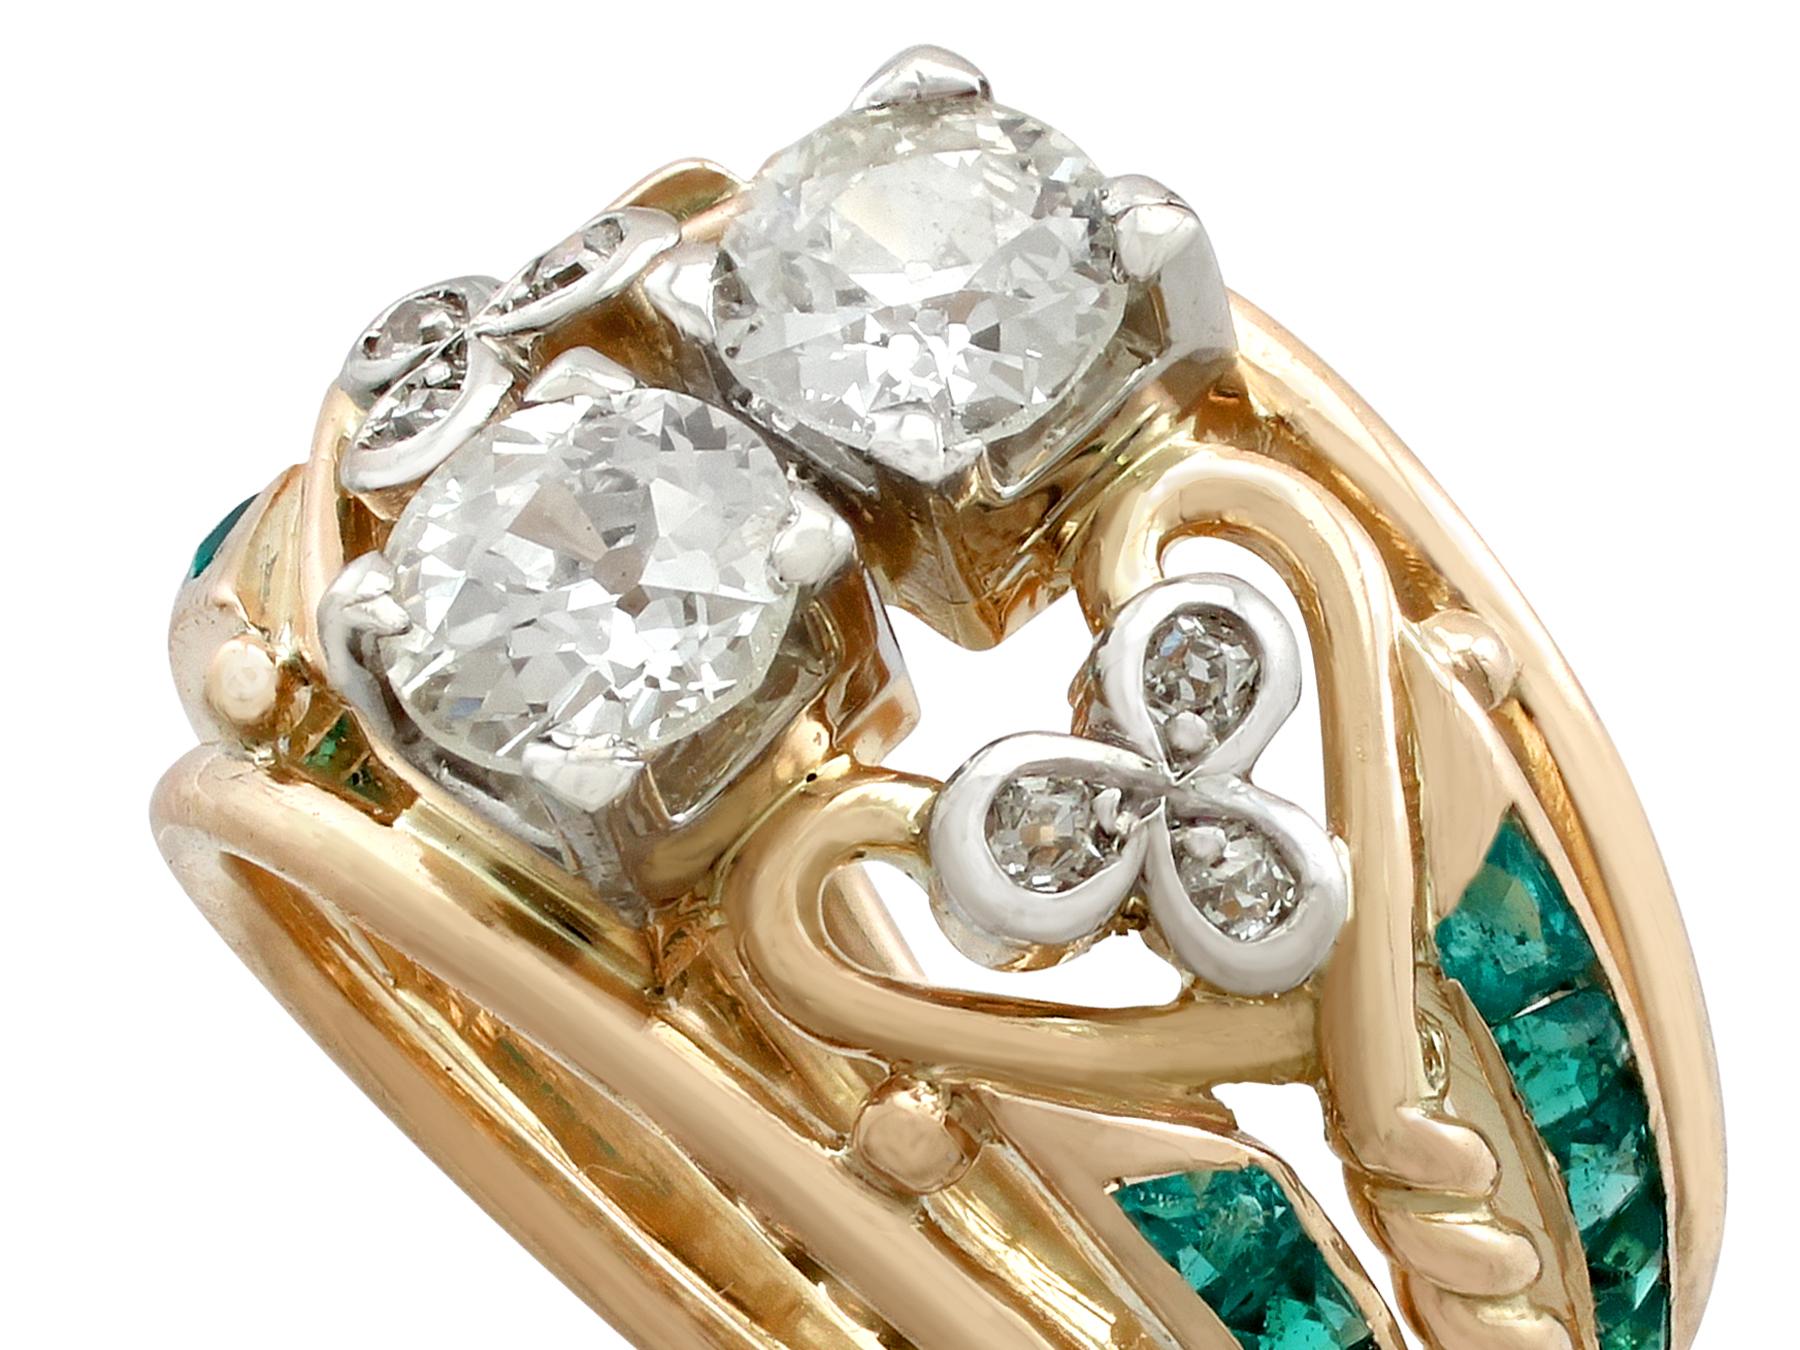 Old European Cut 1940s Emerald and 1.26 carat Diamond Yellow Gold Cocktail Ring Size J1/2 US 5